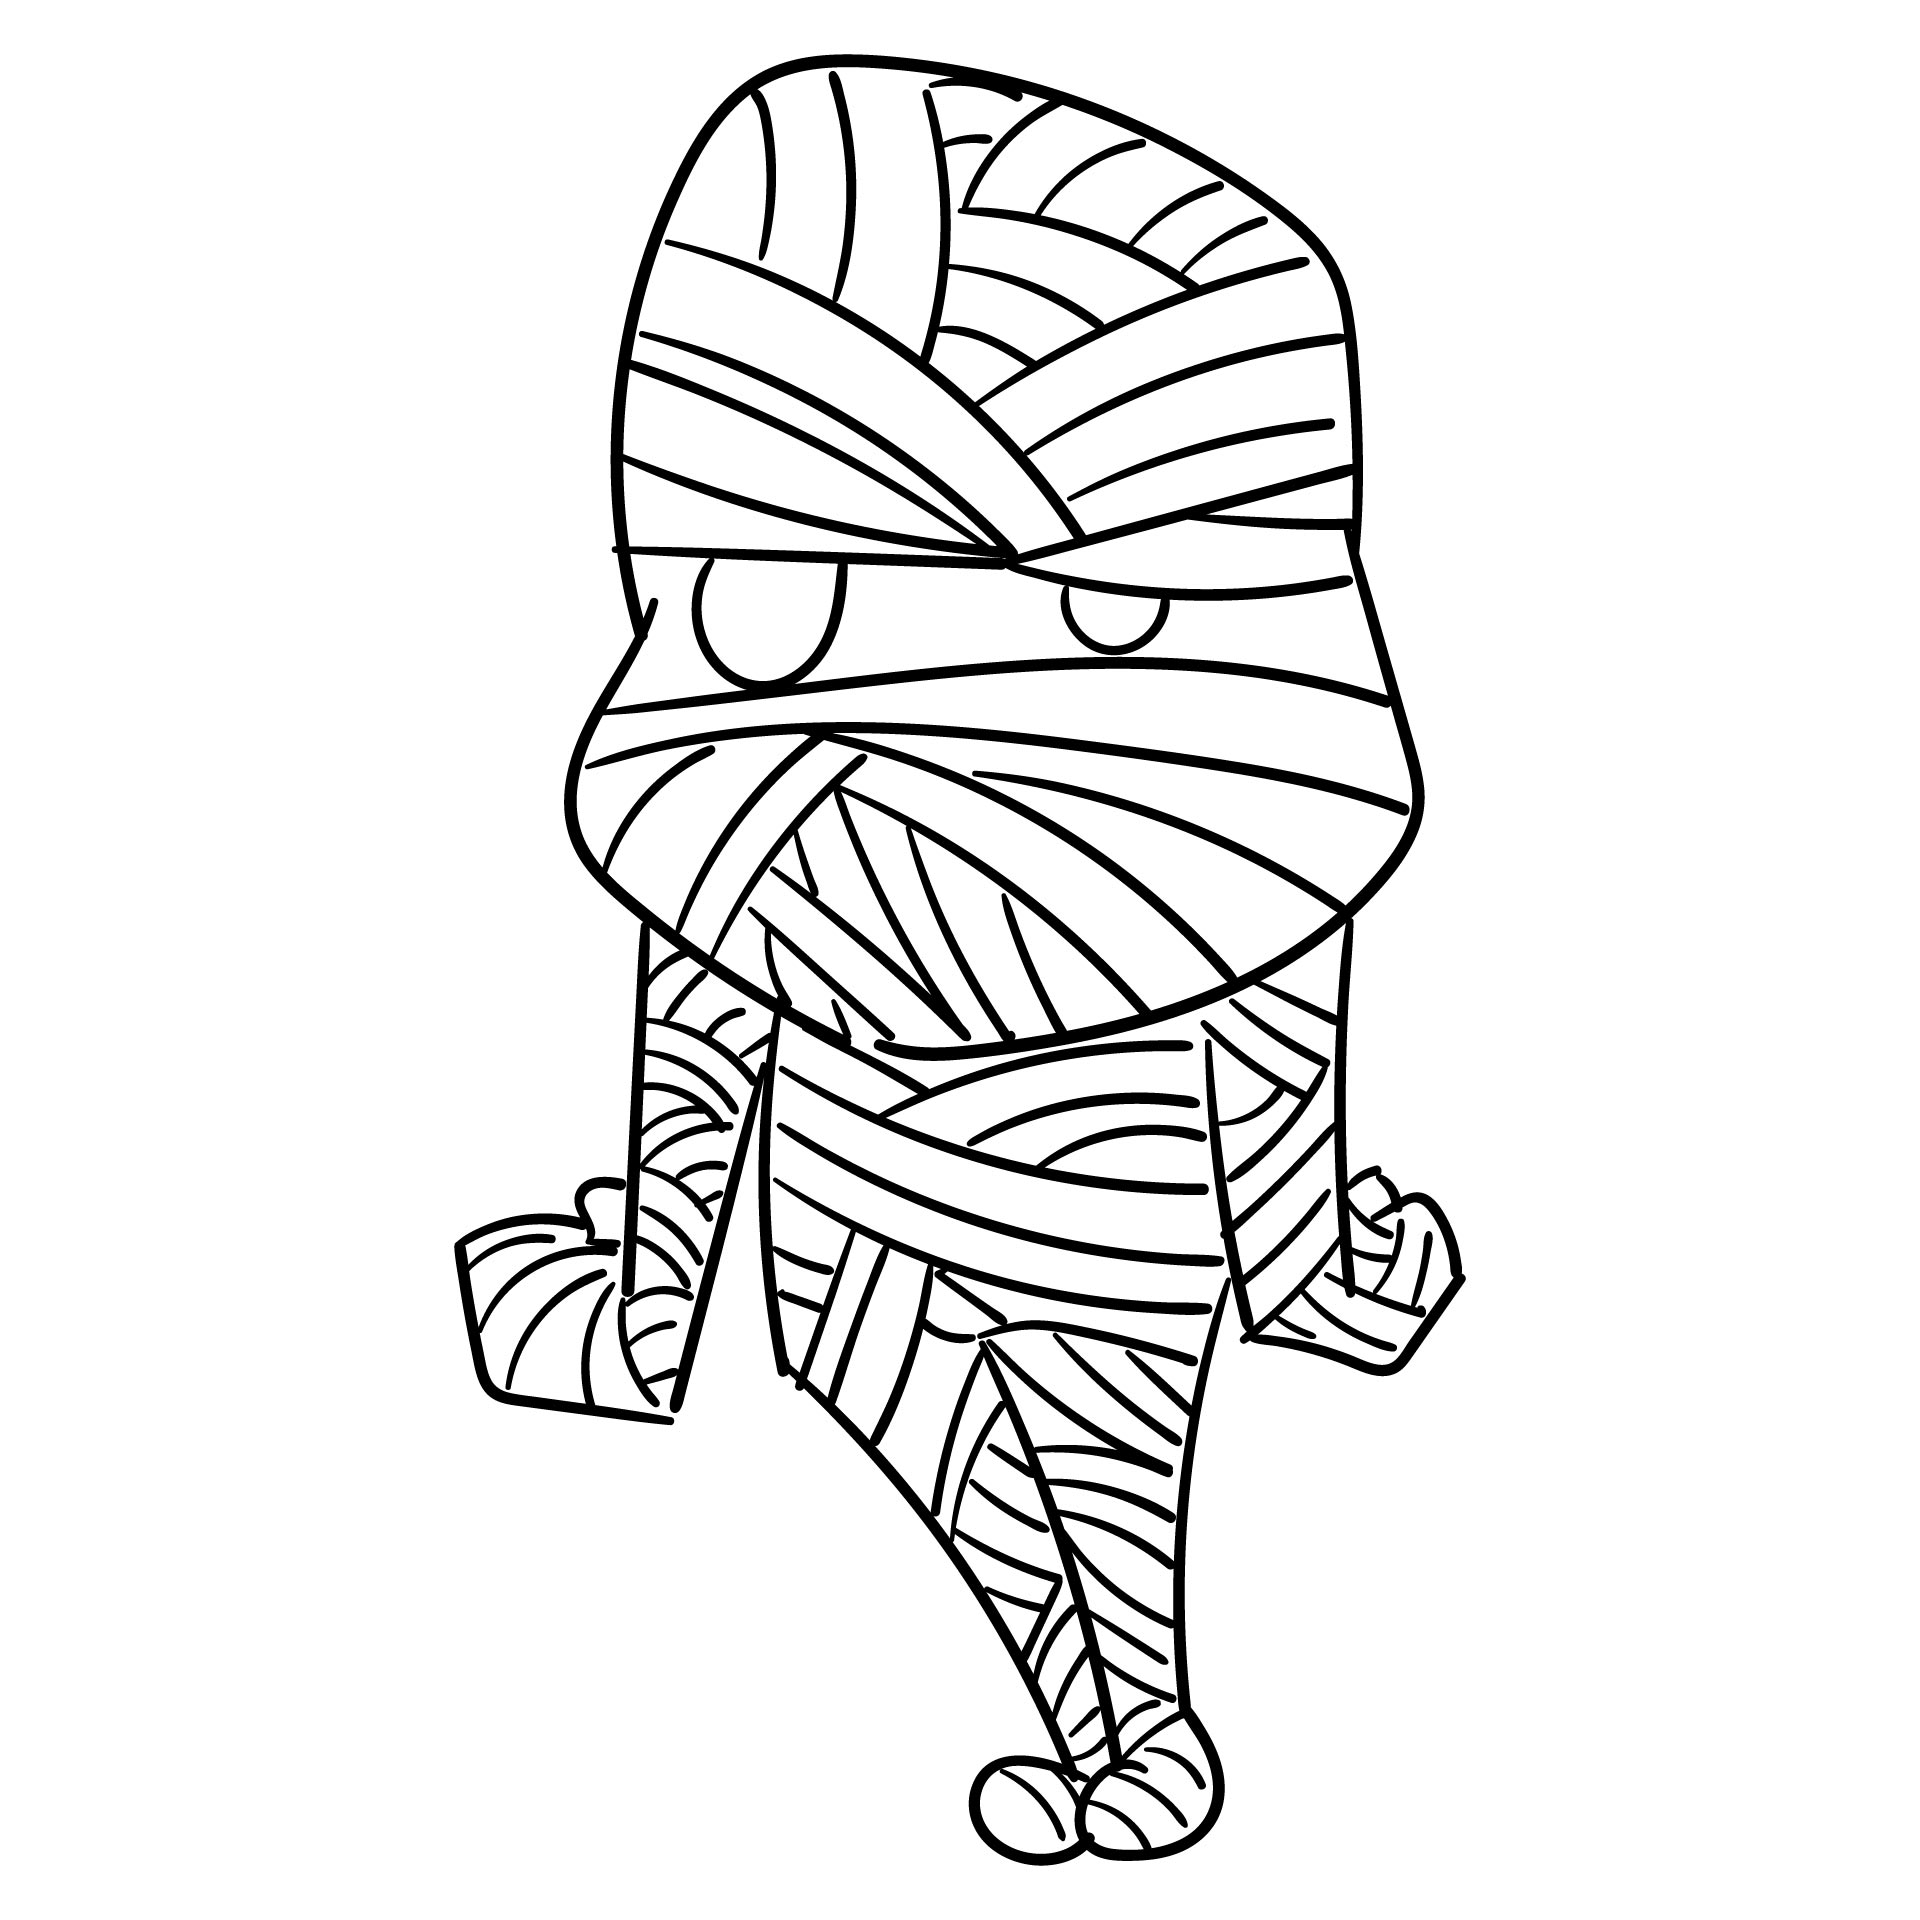 Halloween Mummy Coloring Page